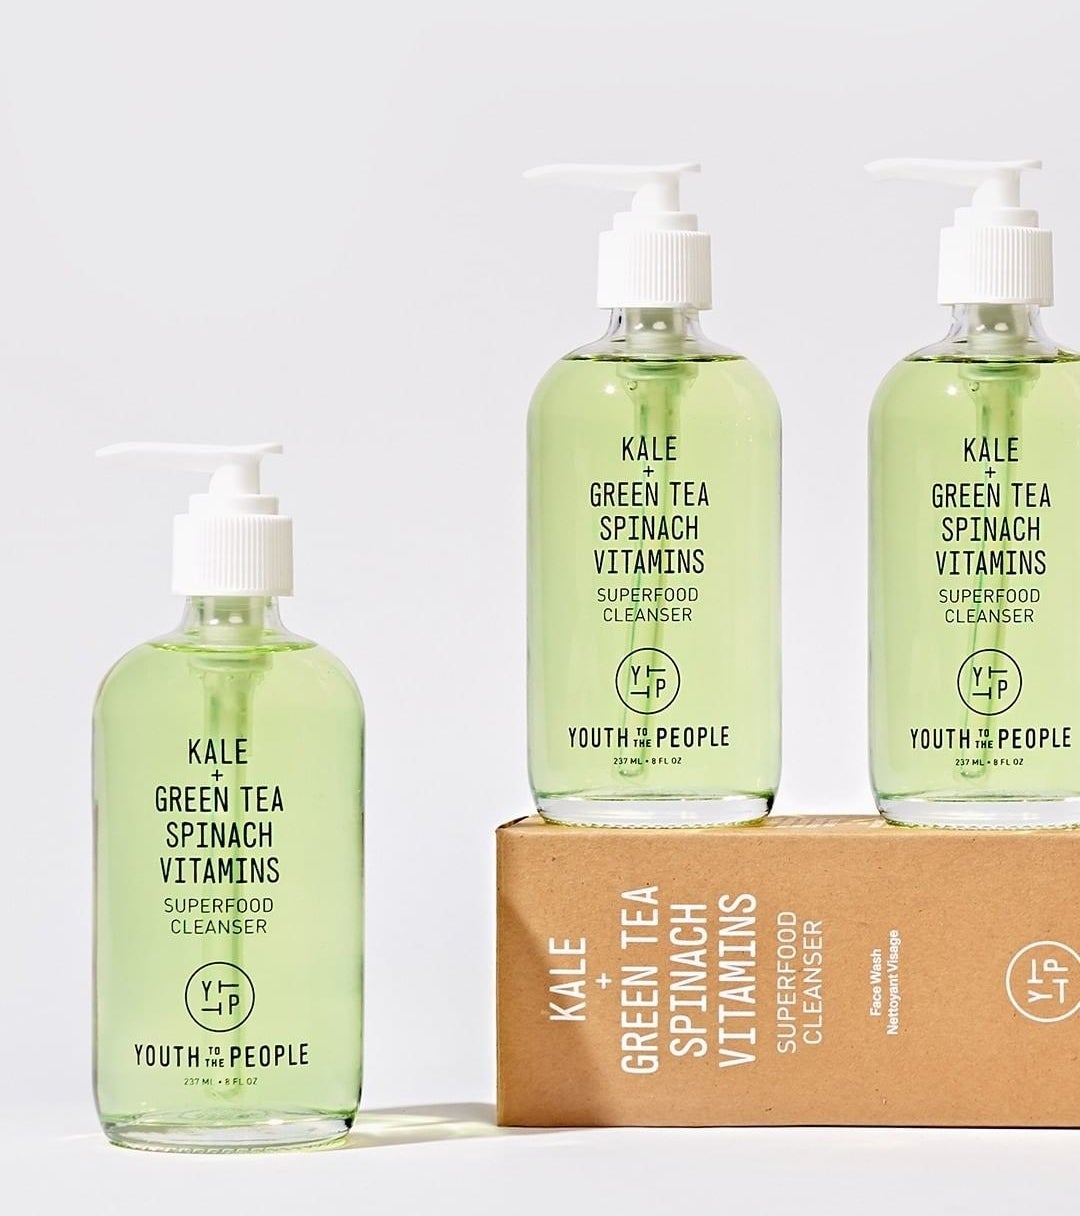 A trio of facial cleansers in transparent glass bottles arranged on a simple background